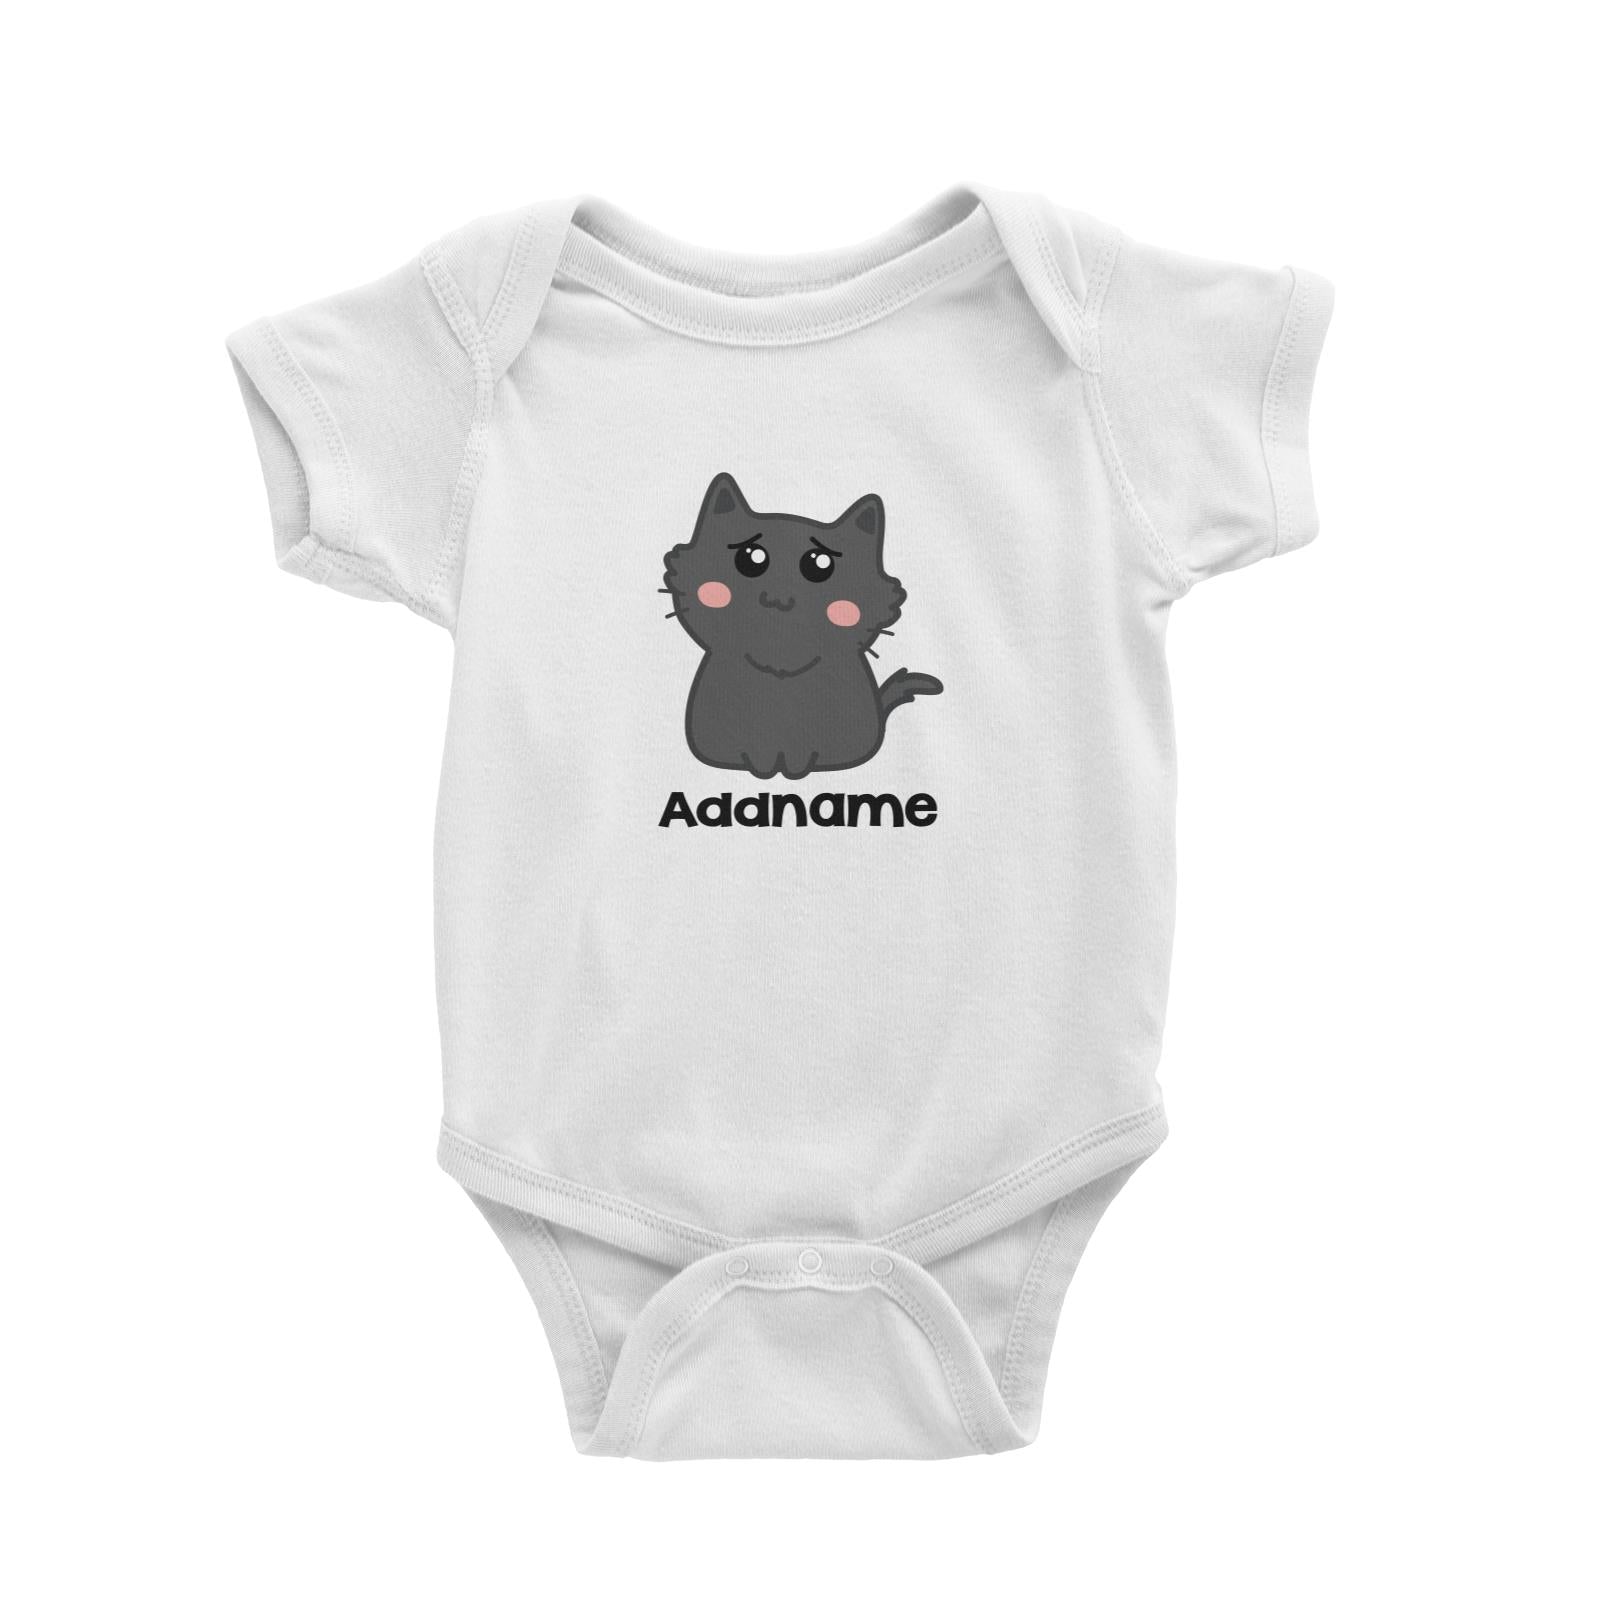 Drawn Adorable Cats Dark Grey Addname Baby Romper